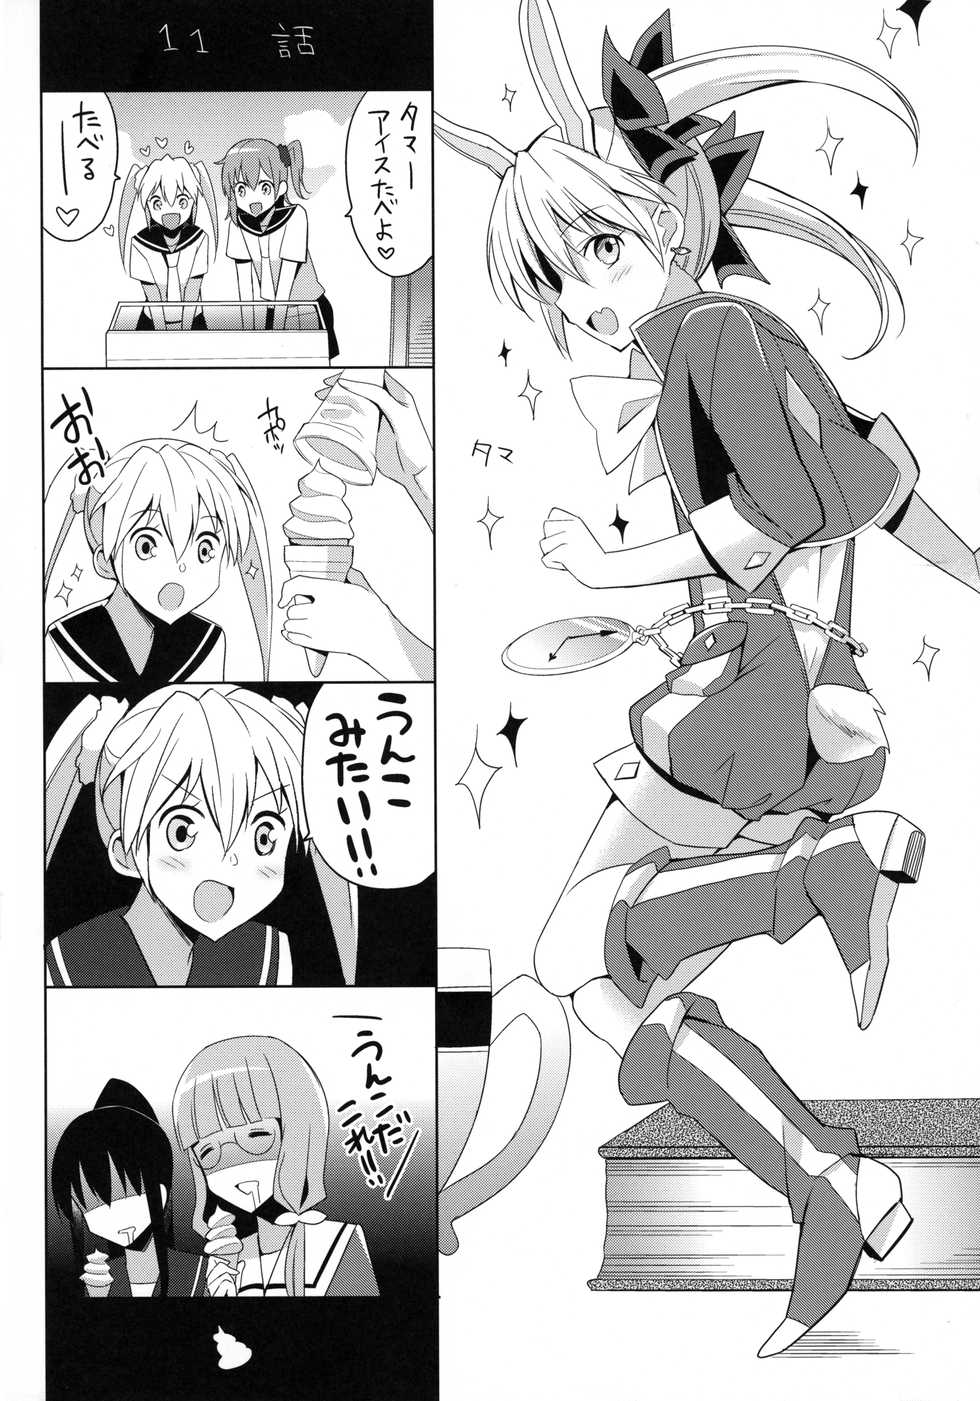 (CT24) [SEM;COLON (Mitsu King)] G.I.R.L (Selector Infected WIXOSS) - Page 22